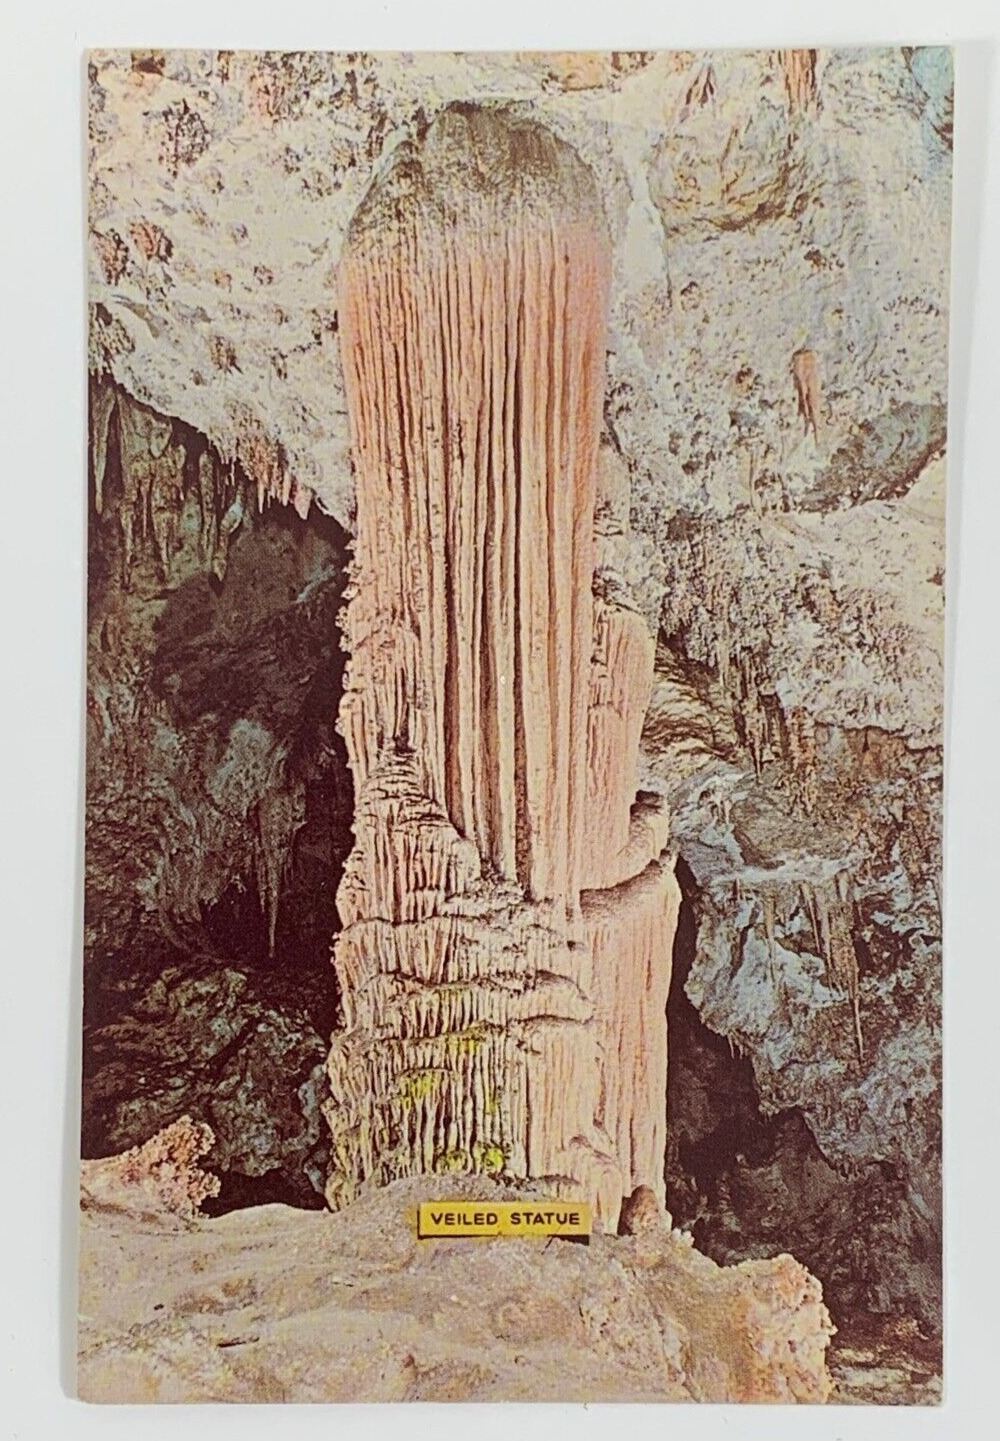 Veiled Statue Carlsbad Caverns National Park New Mexico Postcard Unposted